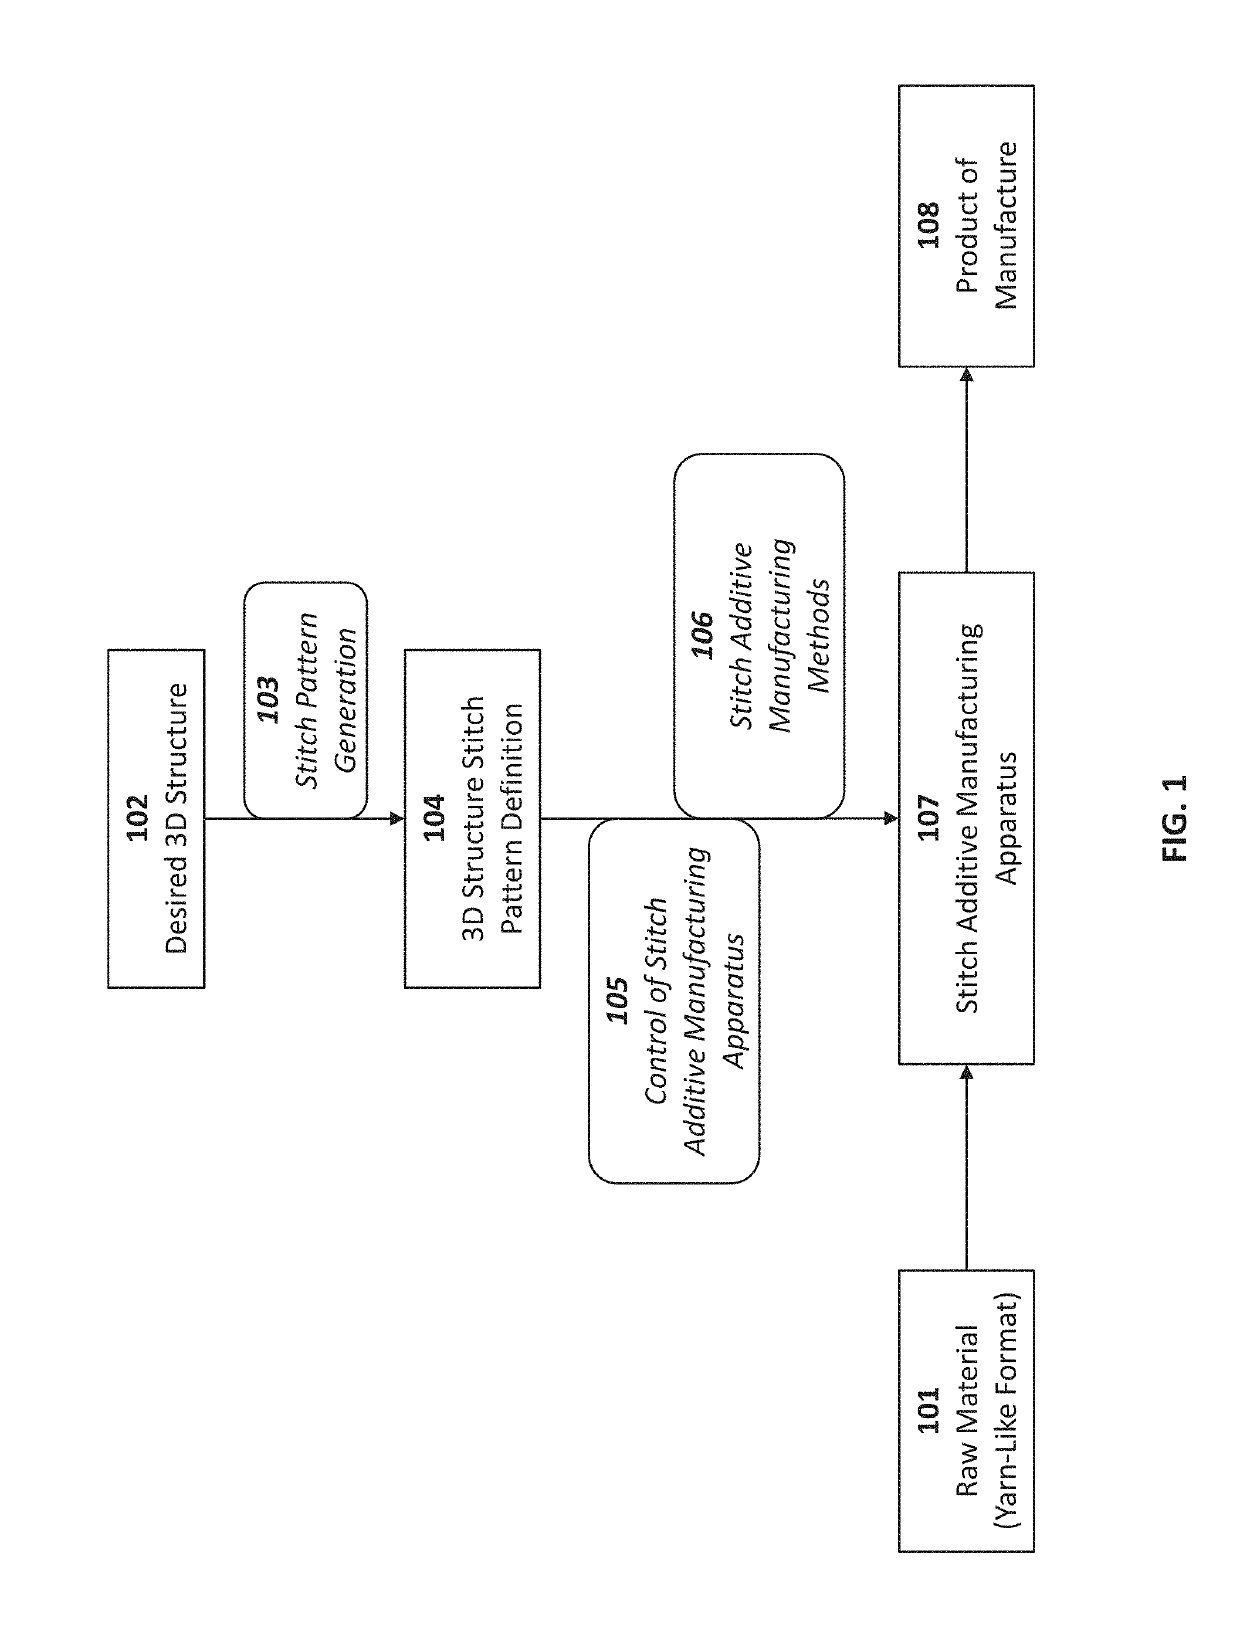 Additive manufacturing system using interlinked repeating subunits